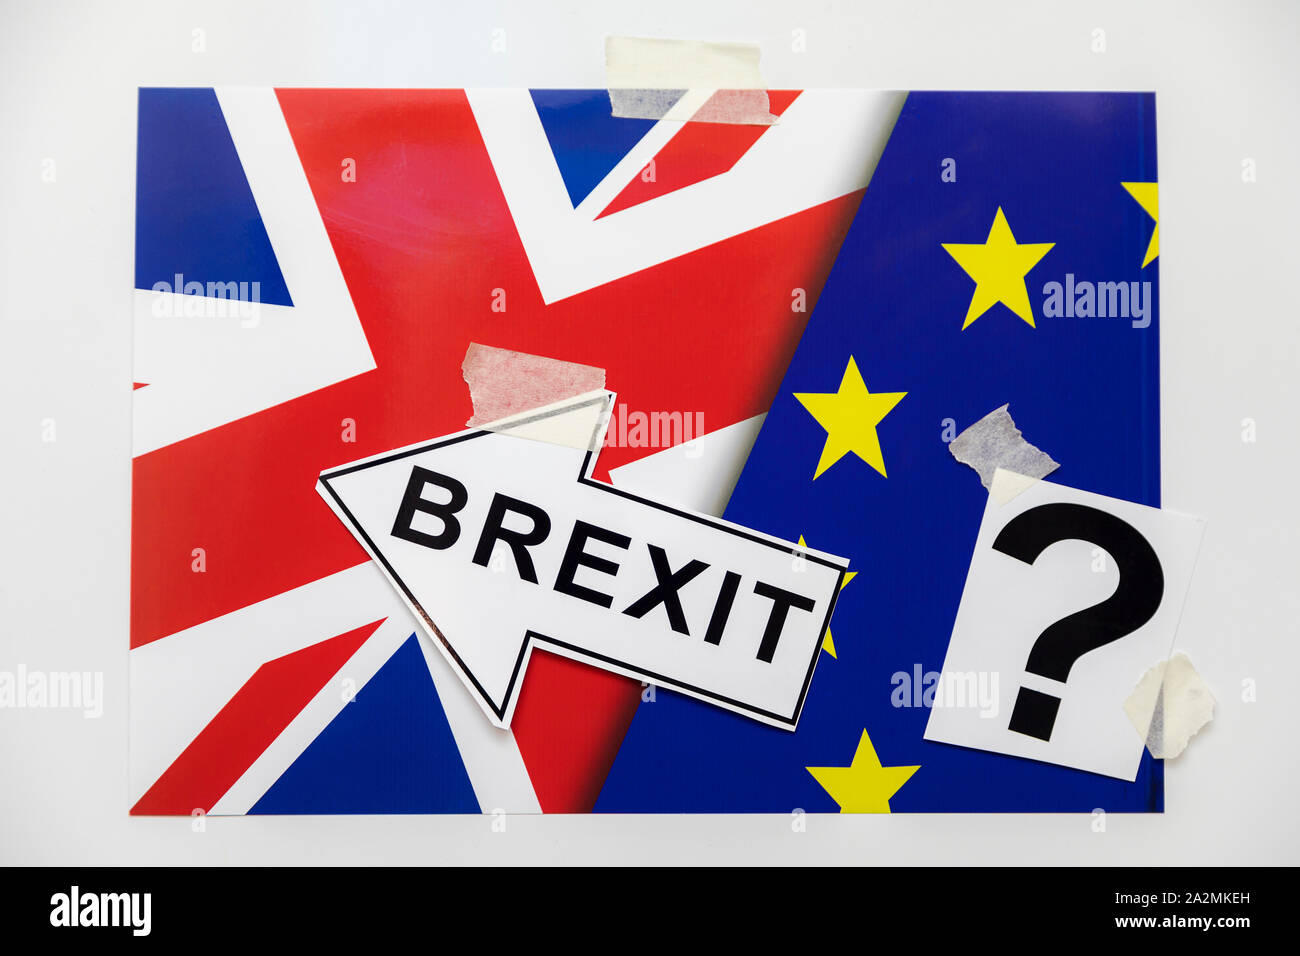 Brexit One Big Question Mark, British And European Union Flag Pair, Brexit Arrow sign and Question Mark as Concept Ideas. UK leaving EU Stock Photo